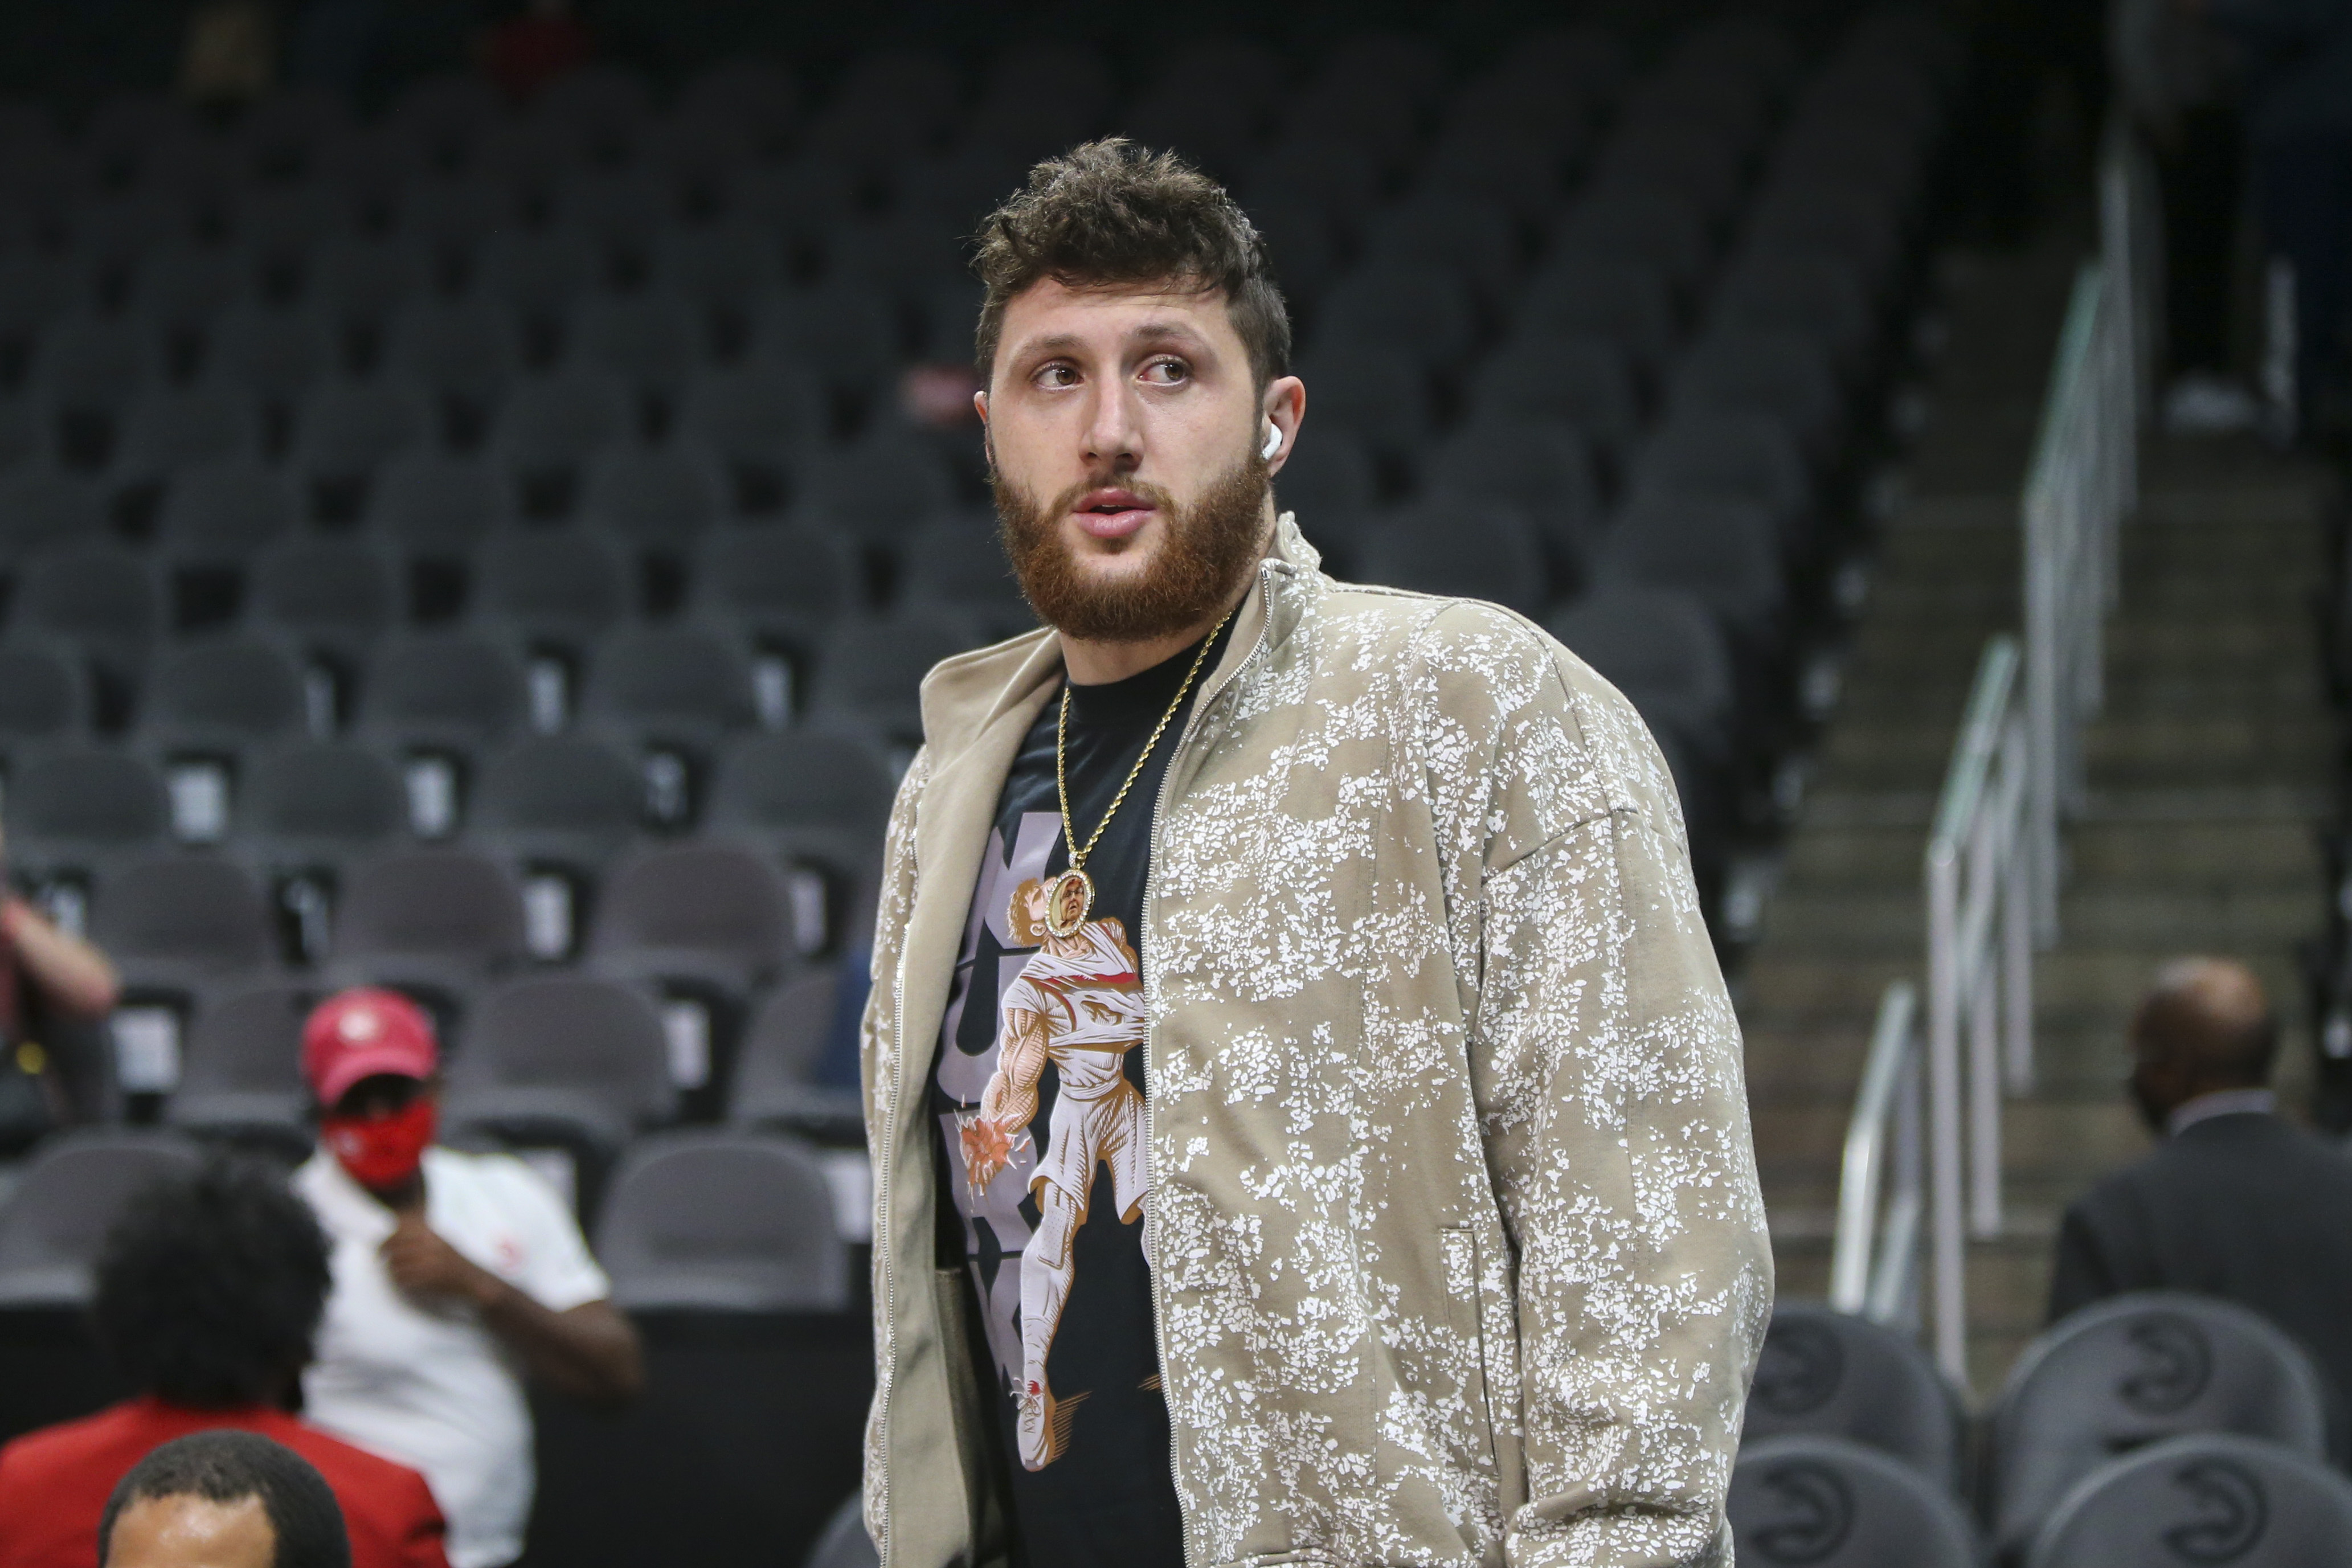 Video: Blazers’ Jusuf Nurkic Throws Pacers Fan’s Phone During Postgame Confrontation